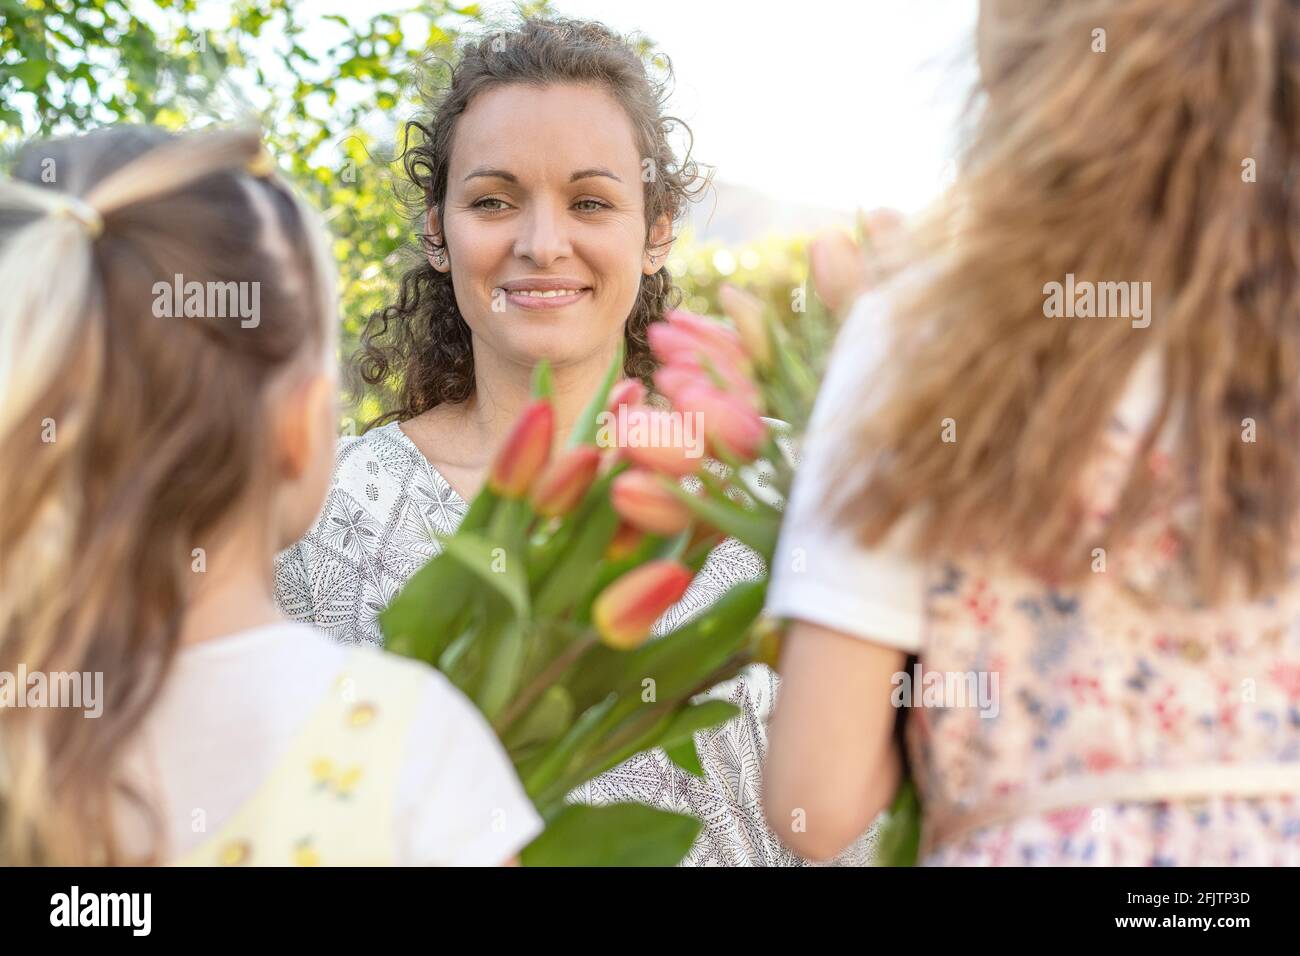 https://c8.alamy.com/comp/2FJTP3D/happy-mothers-day-little-cute-girls-holding-flowers-as-a-gift-for-her-mother-summer-garden-background-mothers-day-or-birthday-concept-2FJTP3D.jpg